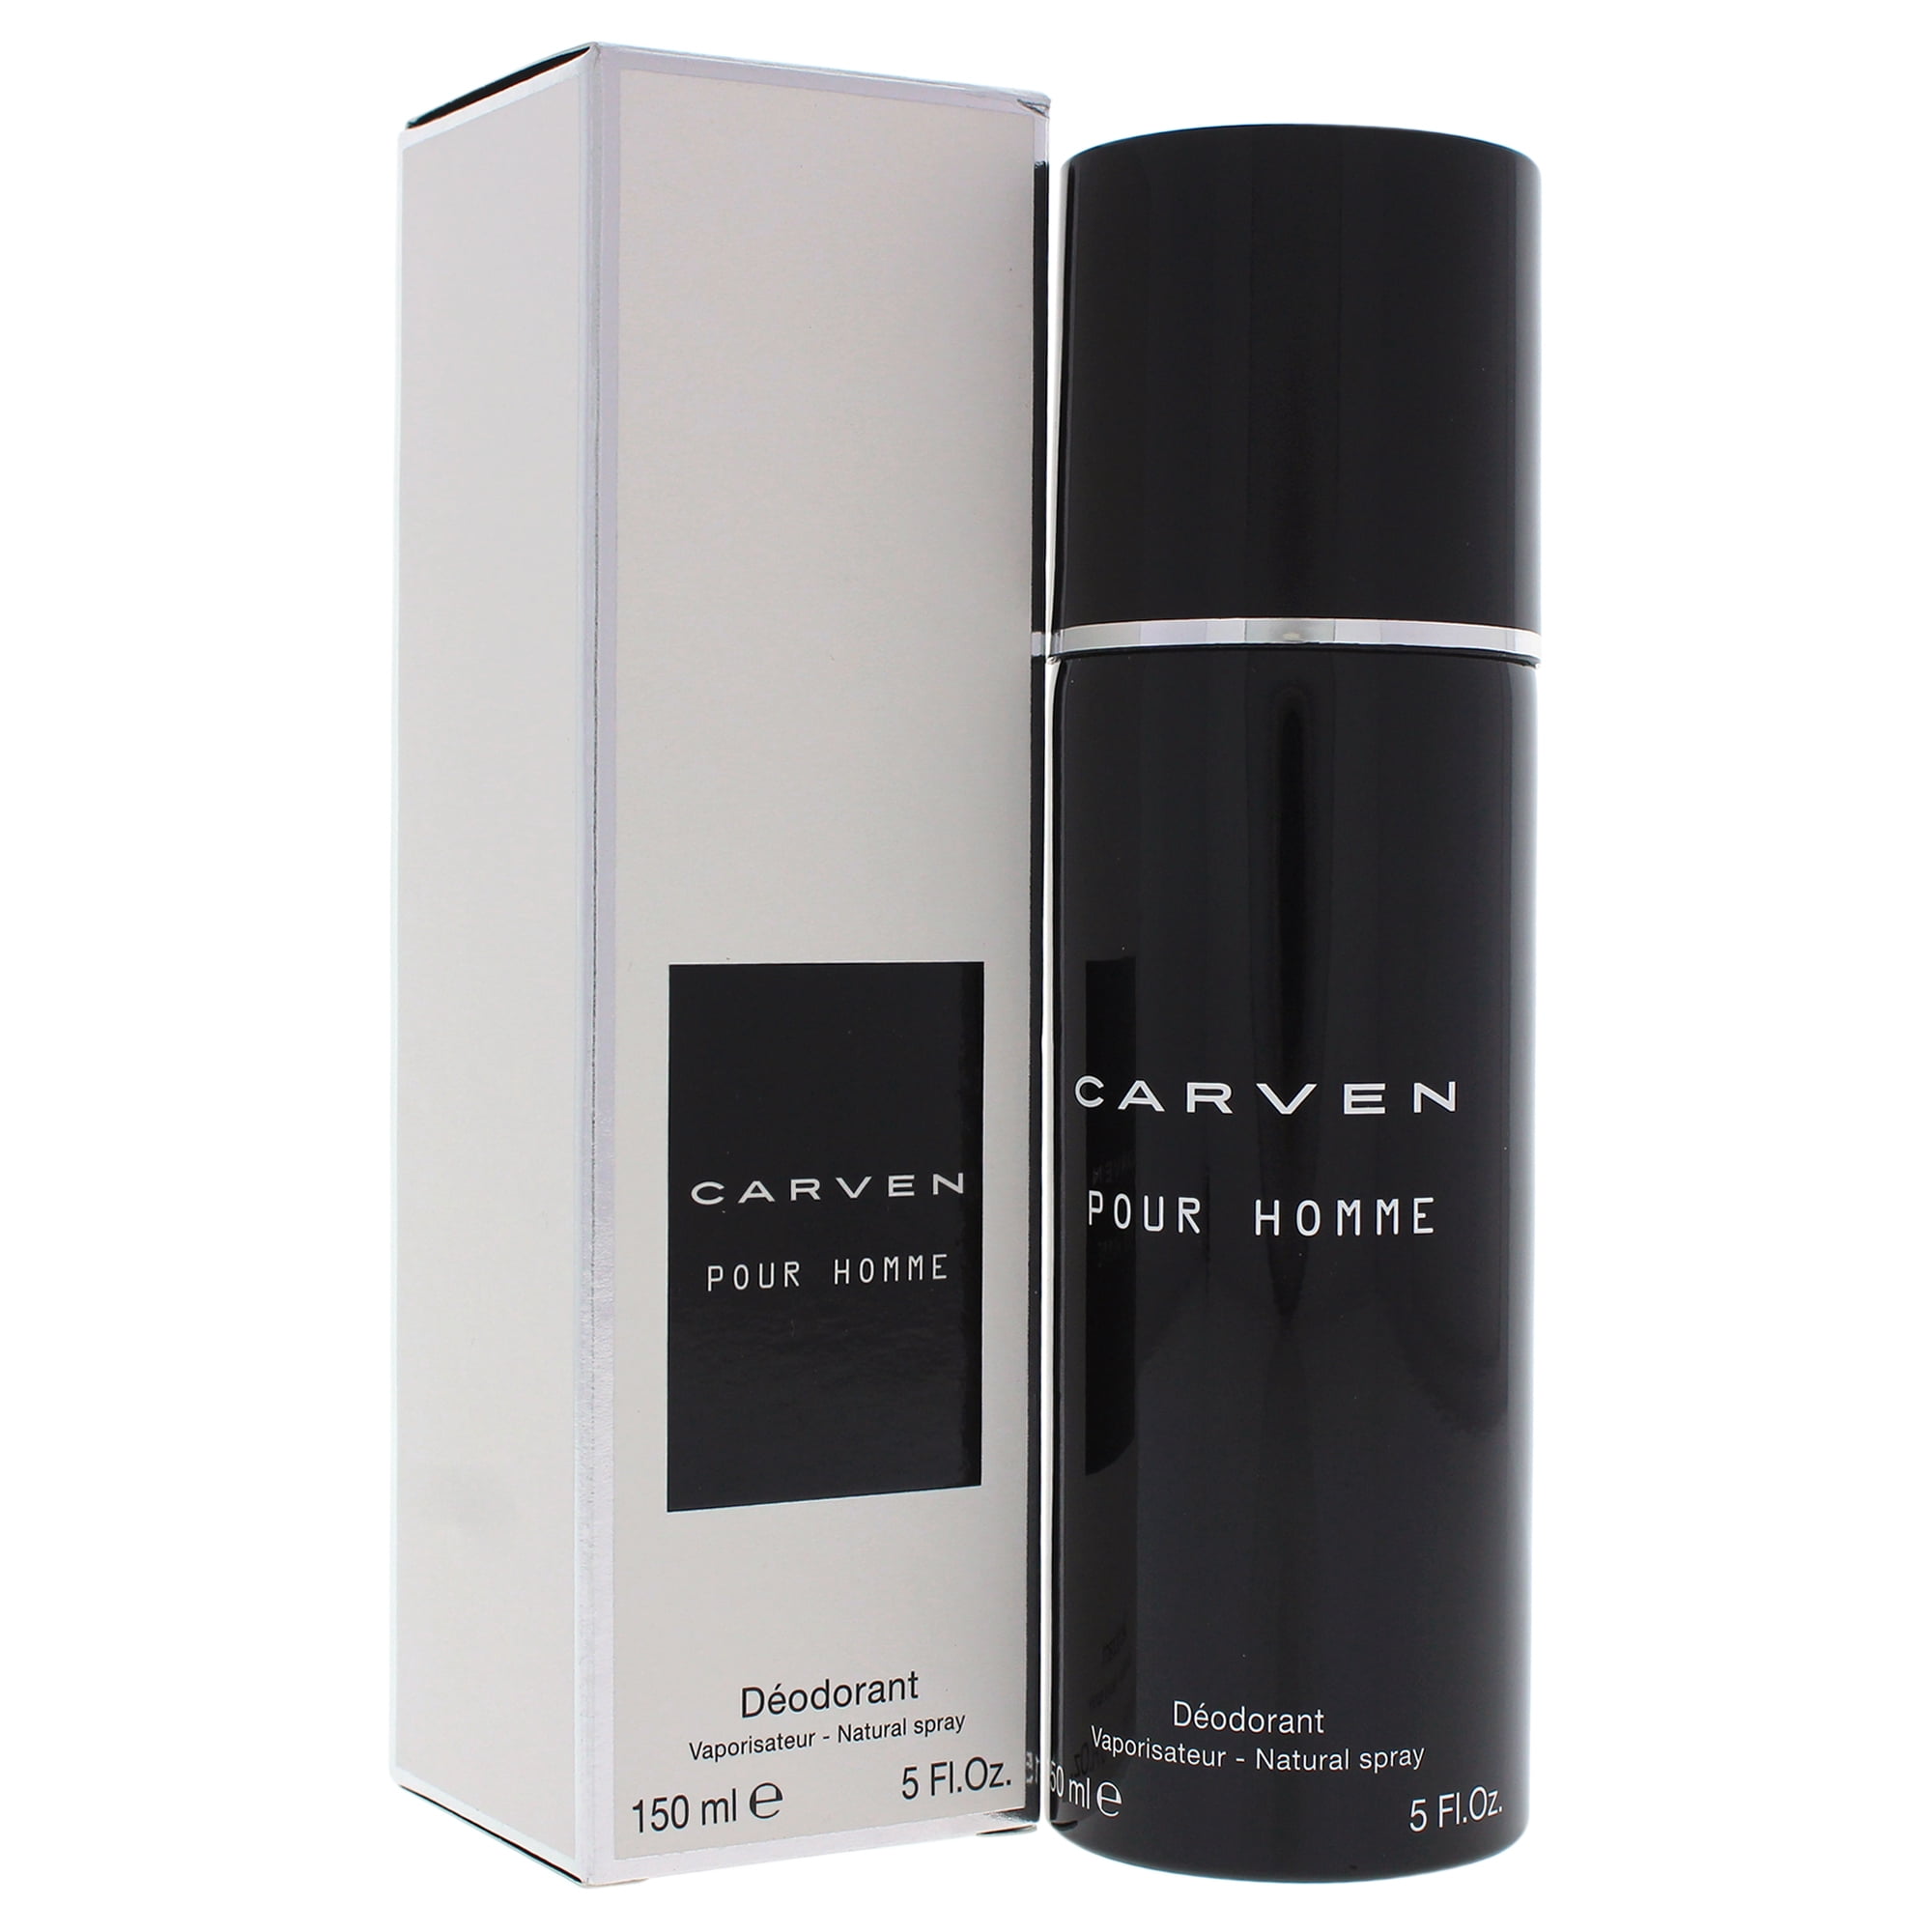 Carven pour homme. Carven pour homme мужские. Carven pour homme набор. Carven pour homme Парфюм для мужчин характеристики. Carven Парфюм для мужчин цена.